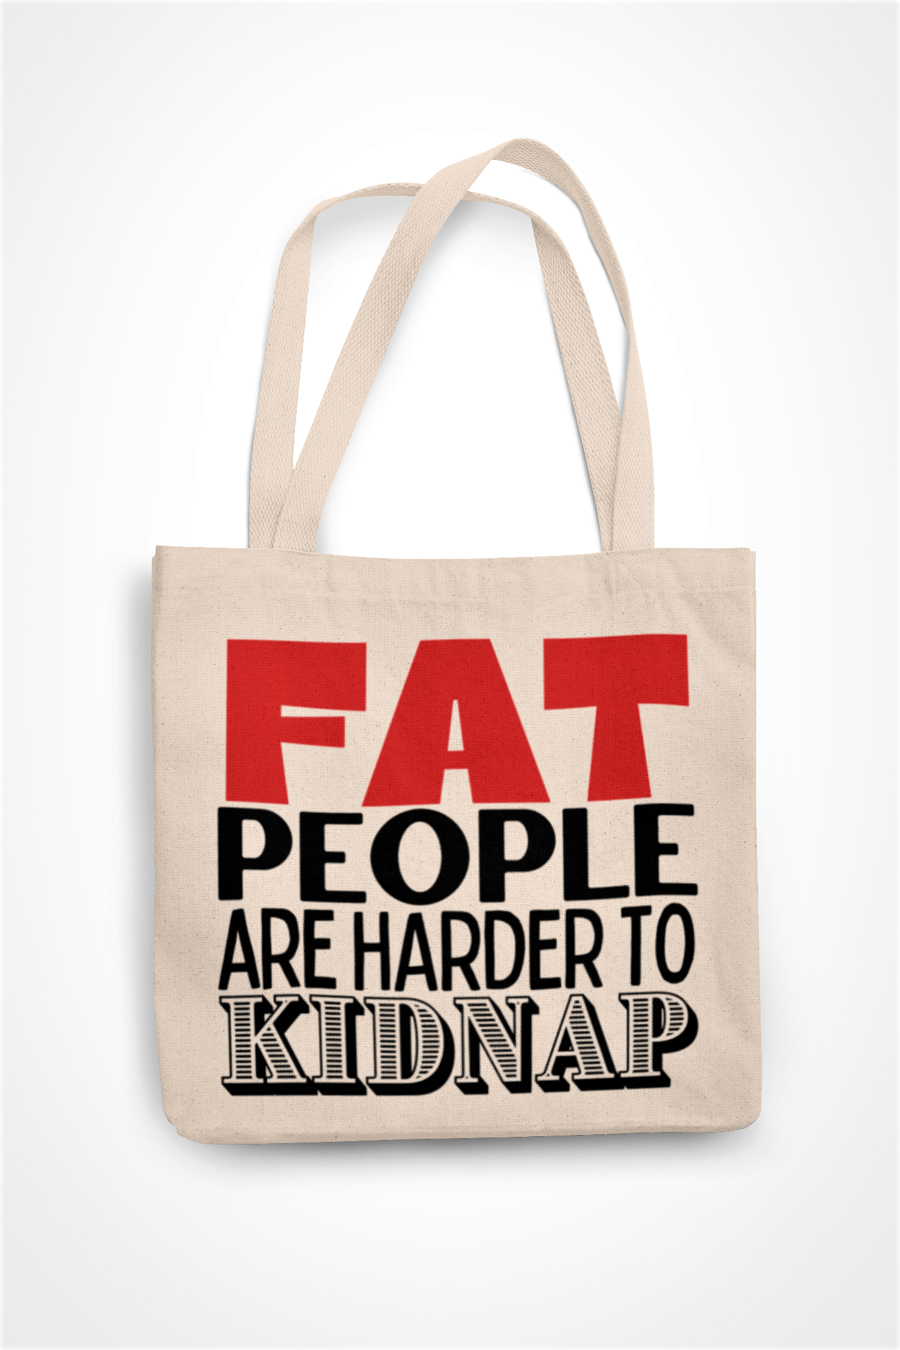 Fat People Are Harder To Kidnap -  Funny Novelty Tote Bag